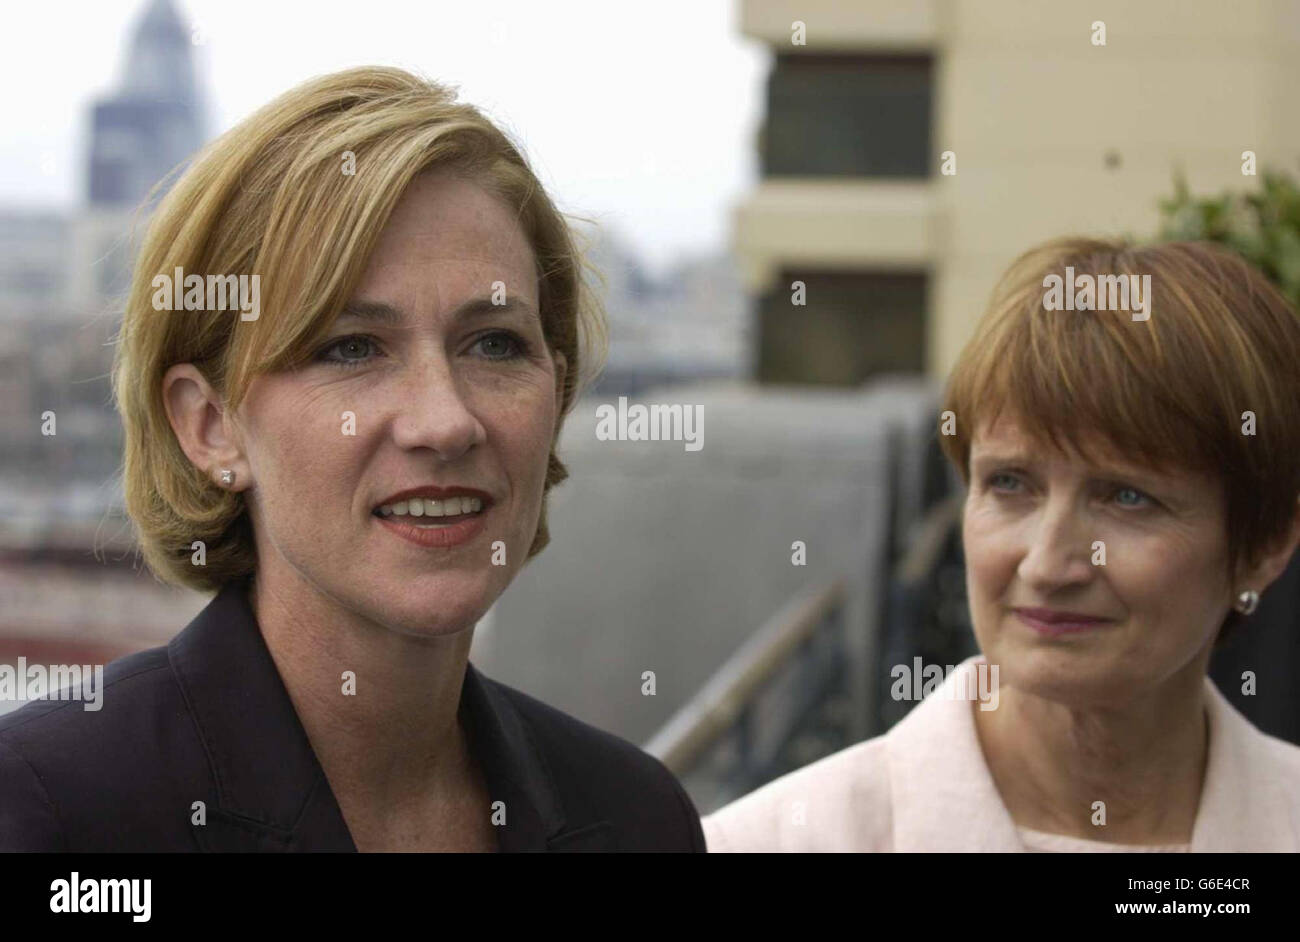 American businesswoman Barbara Cassani who was appointed to lead London's bid for the 2012 Olympic Games. She is with Culture Secretary Tessa Jowell (right) after being unveiled to the media at the Thames Riverside. Stock Photo